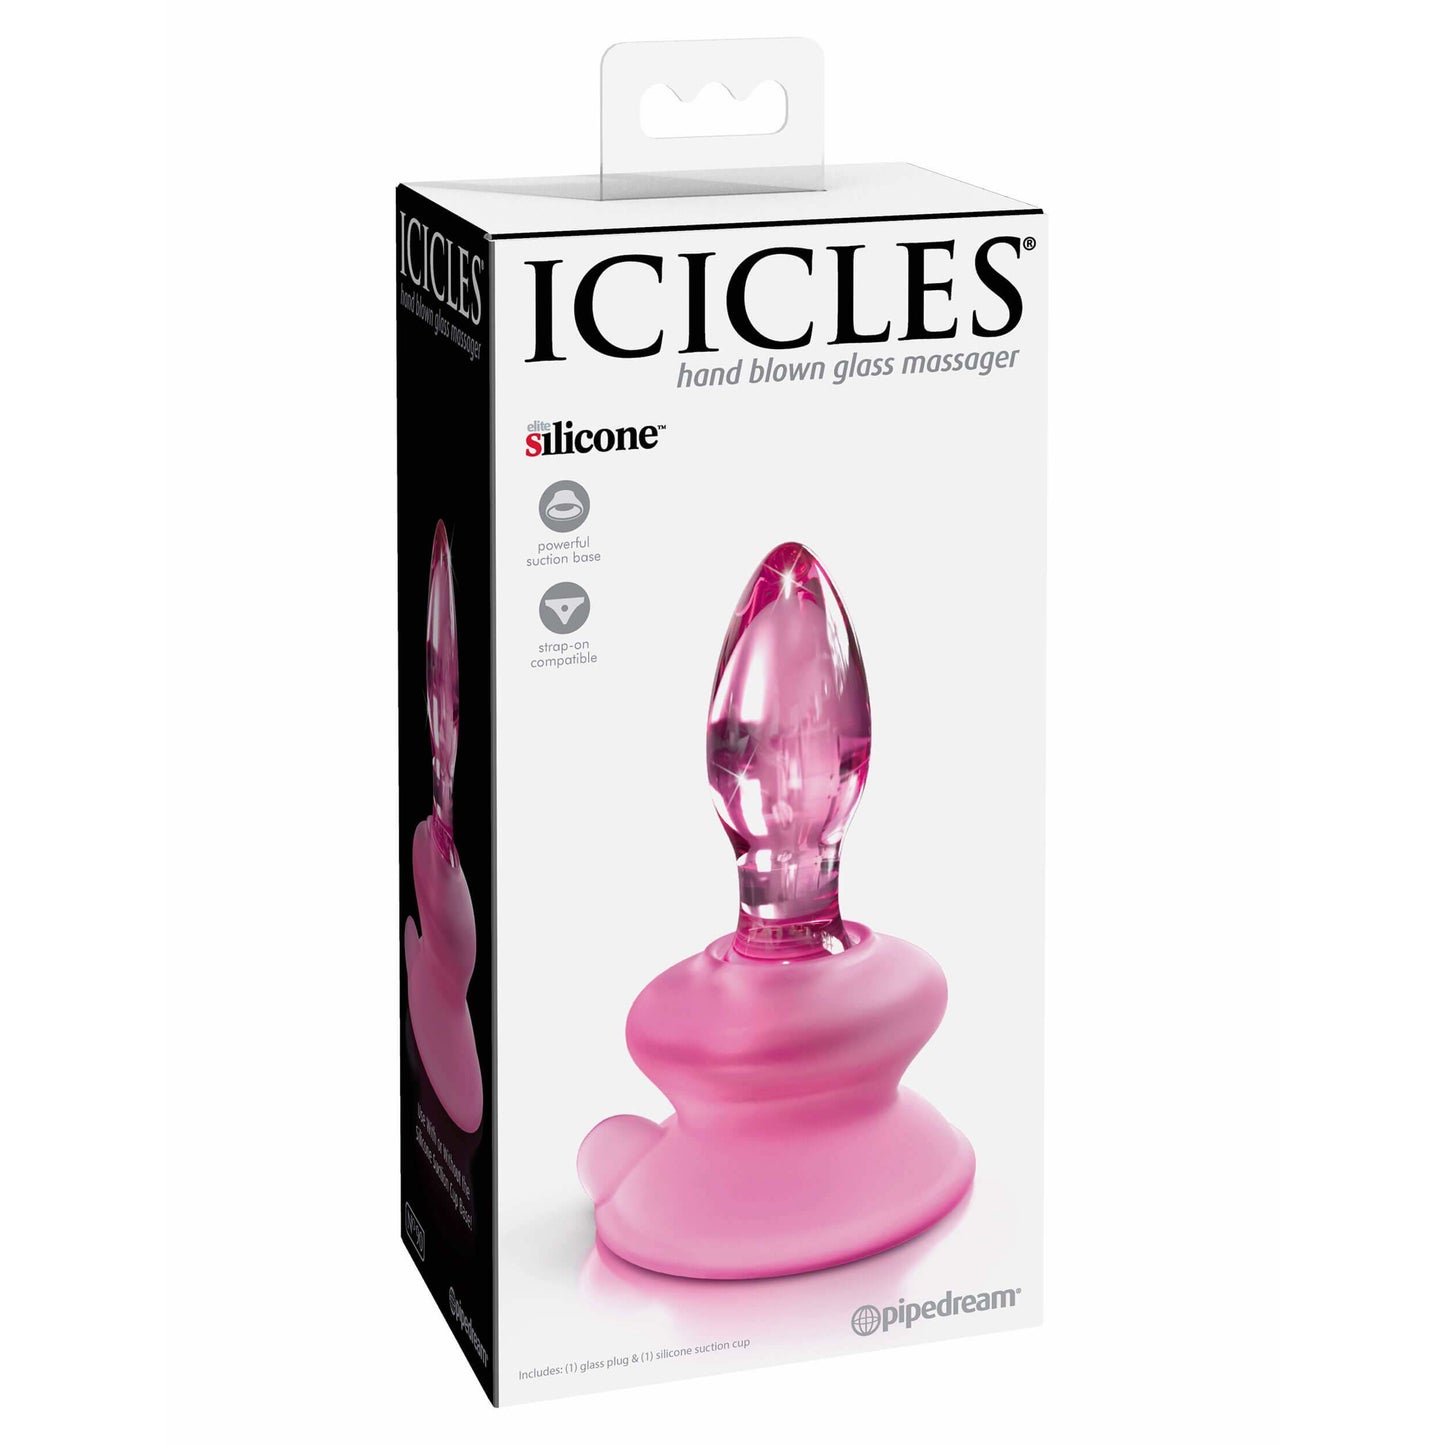 Icicles No. 90 - The Bigger O online sex toy shop USA, Canada & UK shipping available